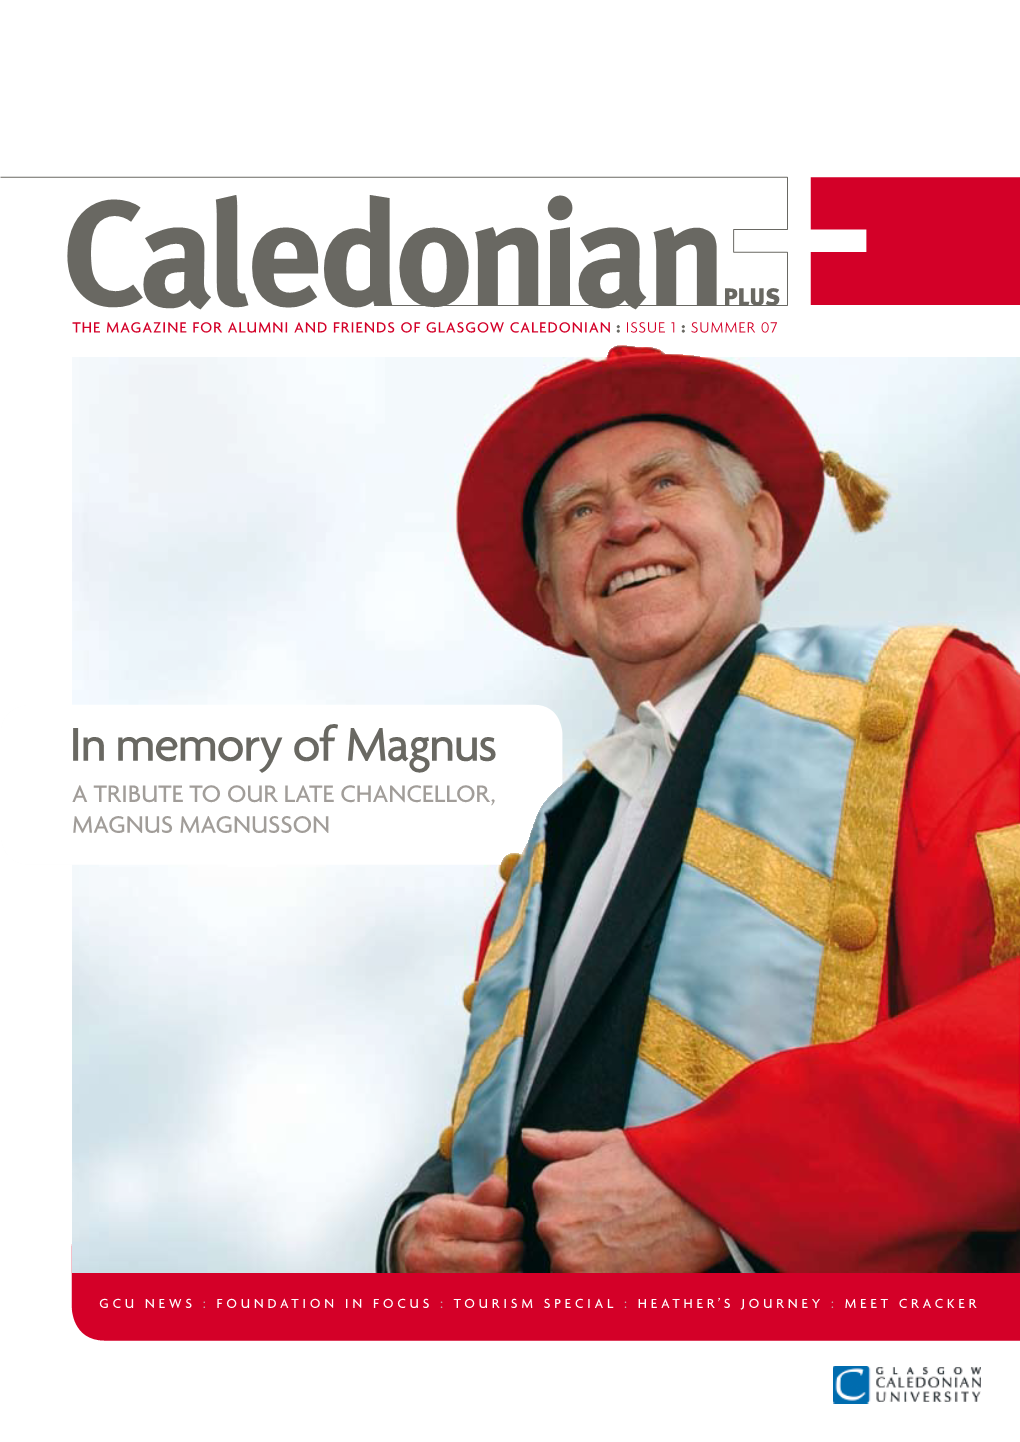 In Memory of Magnus a Tribute to Our Late Chancellor, Magnus Magnusson